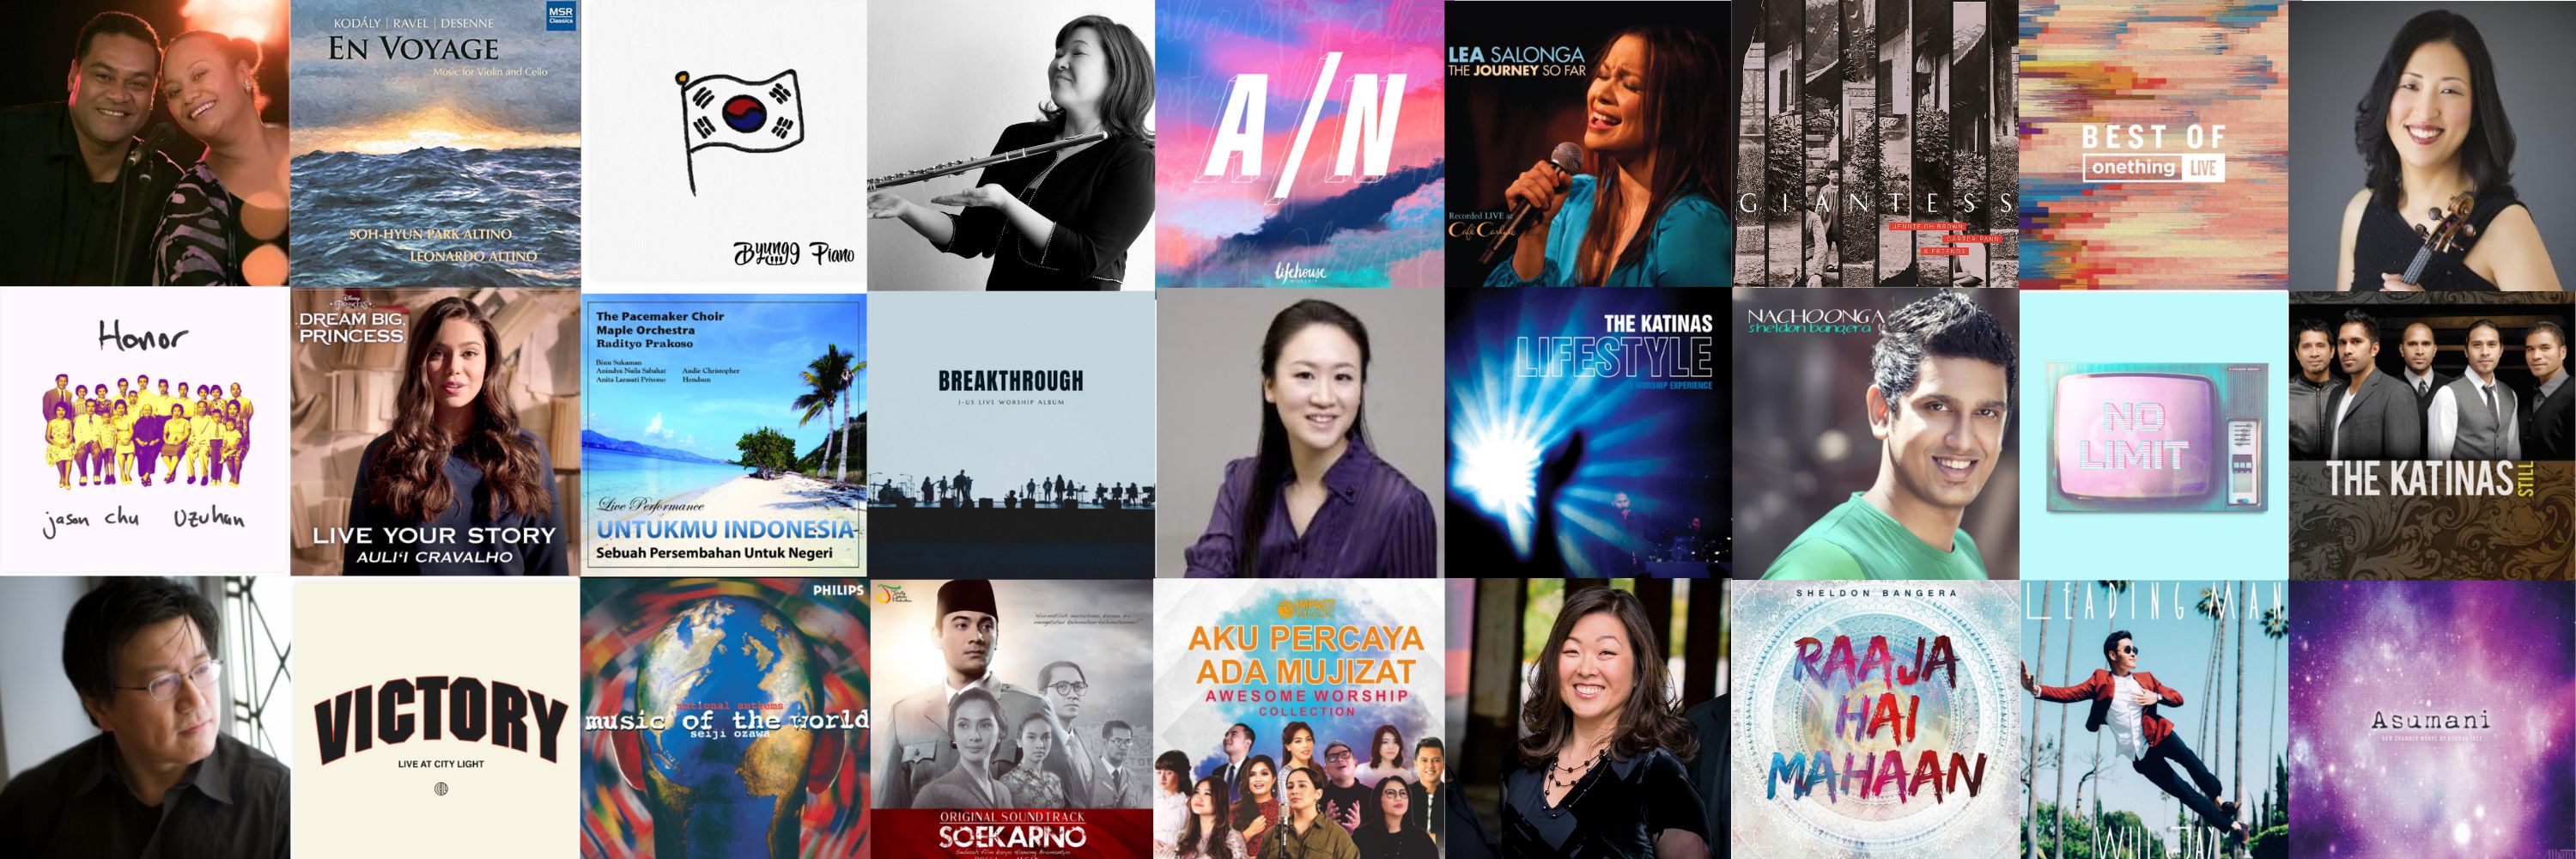 photos of Wheaton's Asian and Pacific Islander faculty and staff members and album covers